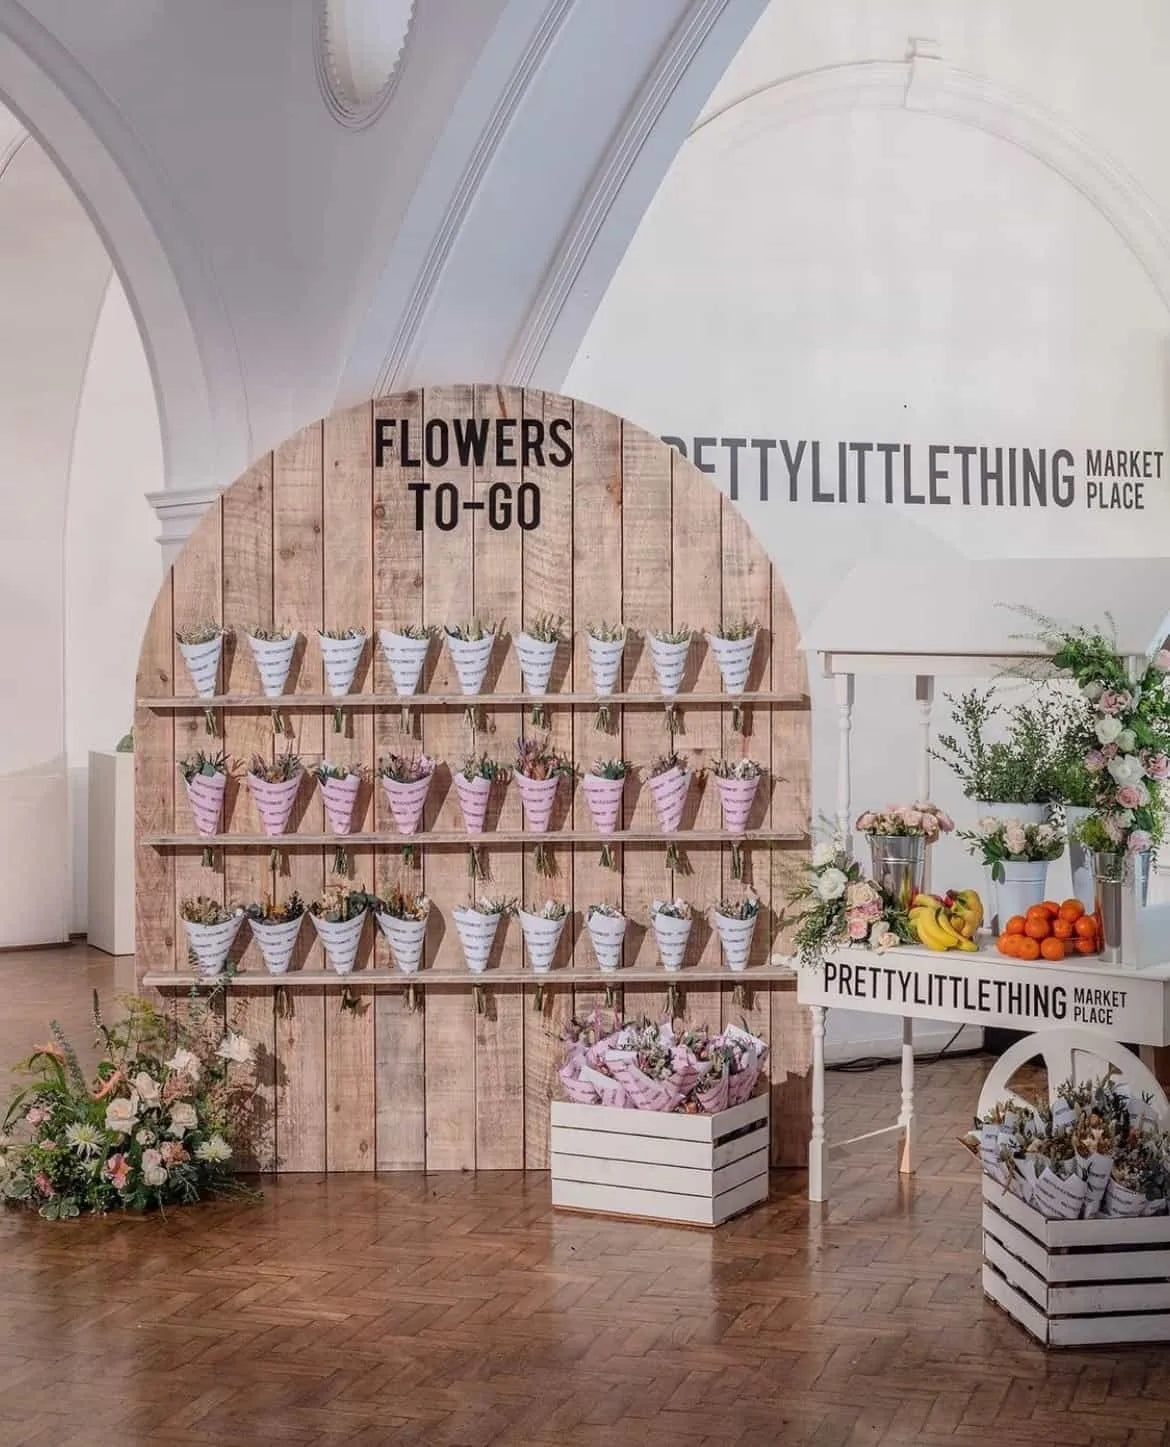 Prettylittlething chose Amaranté London as their Event Florist to design and create bespoke floral arrangements to decorate their event